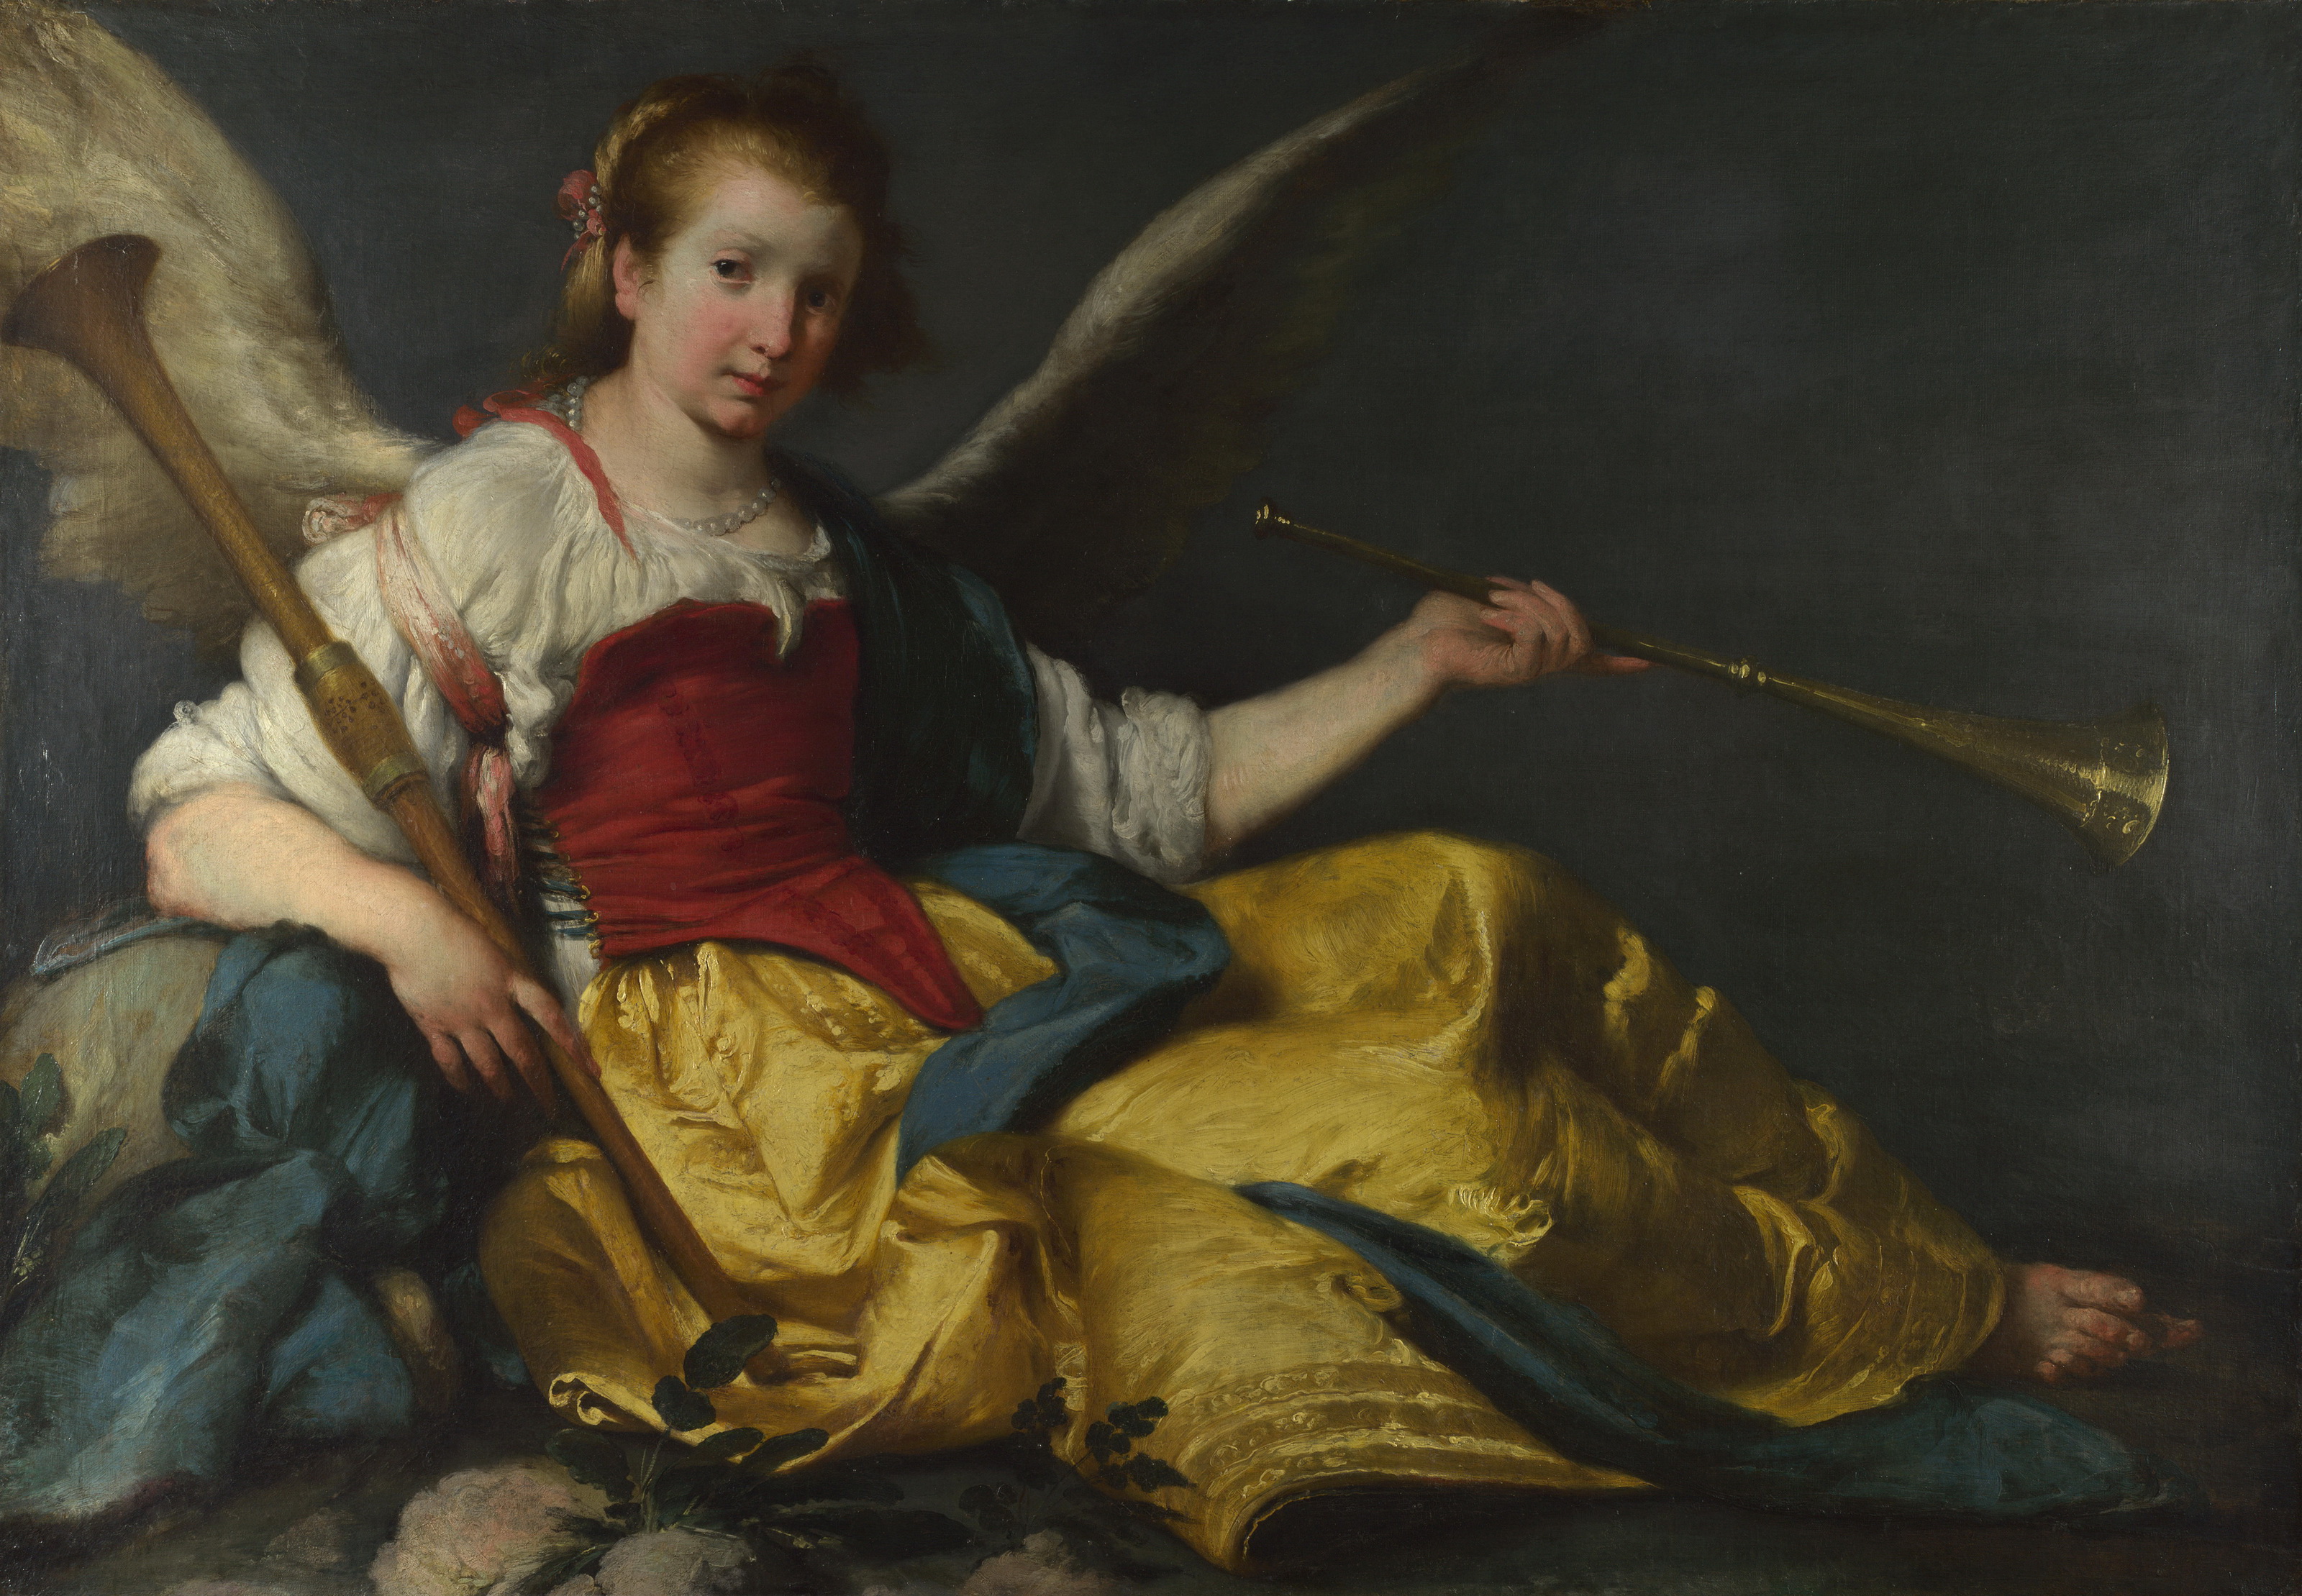 A Personification of Fame by Bernardo Strozzi - 1635-6 - 106.7 x 151.7 cm National Gallery